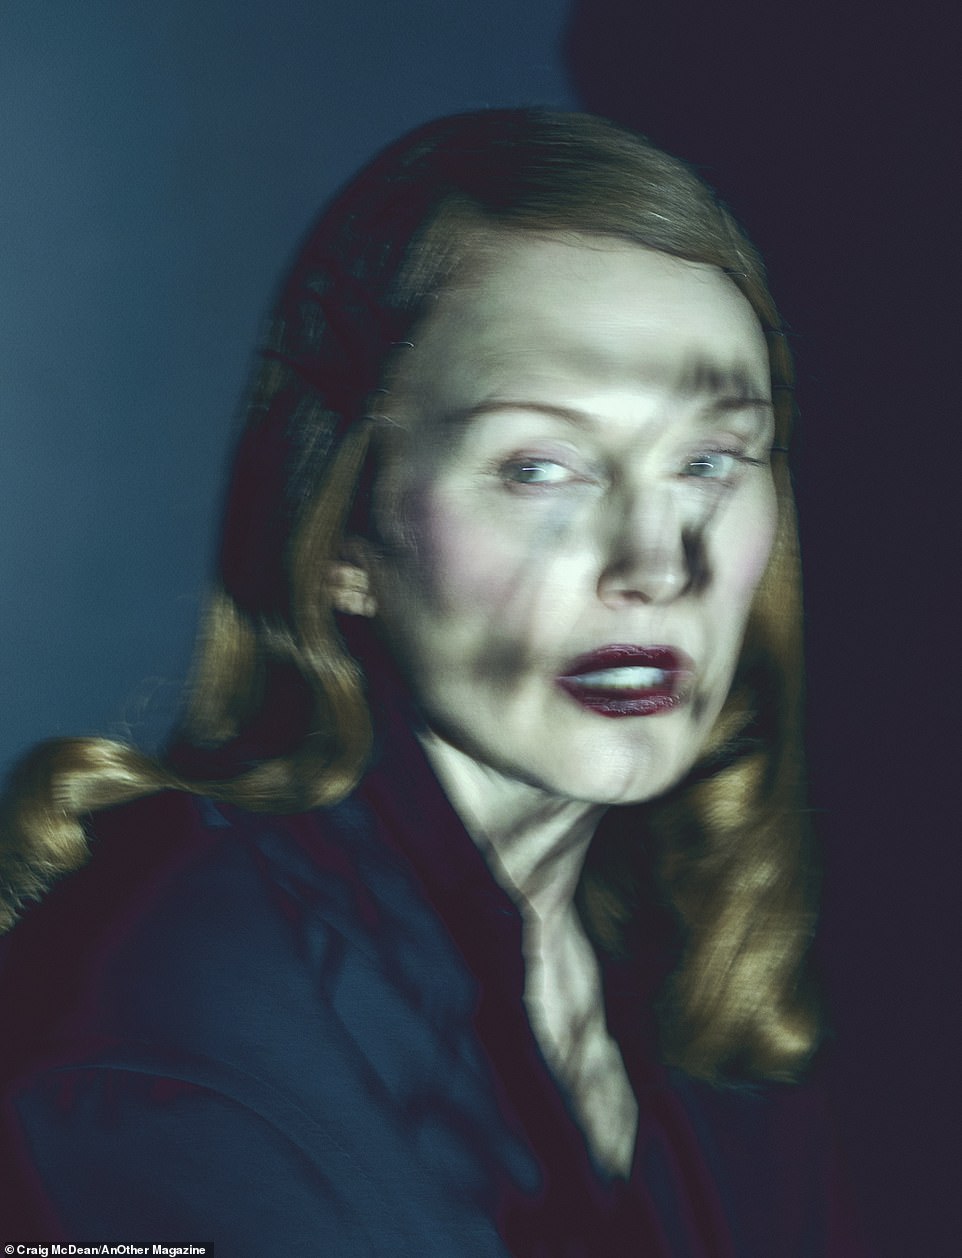 And finally, one photo is a close profile of the beauty with shadows falling on her face. Her hair is styled in a Veronica Lake style and when she looks over her shoulder it is not clear if she was the hunted or the hunter.